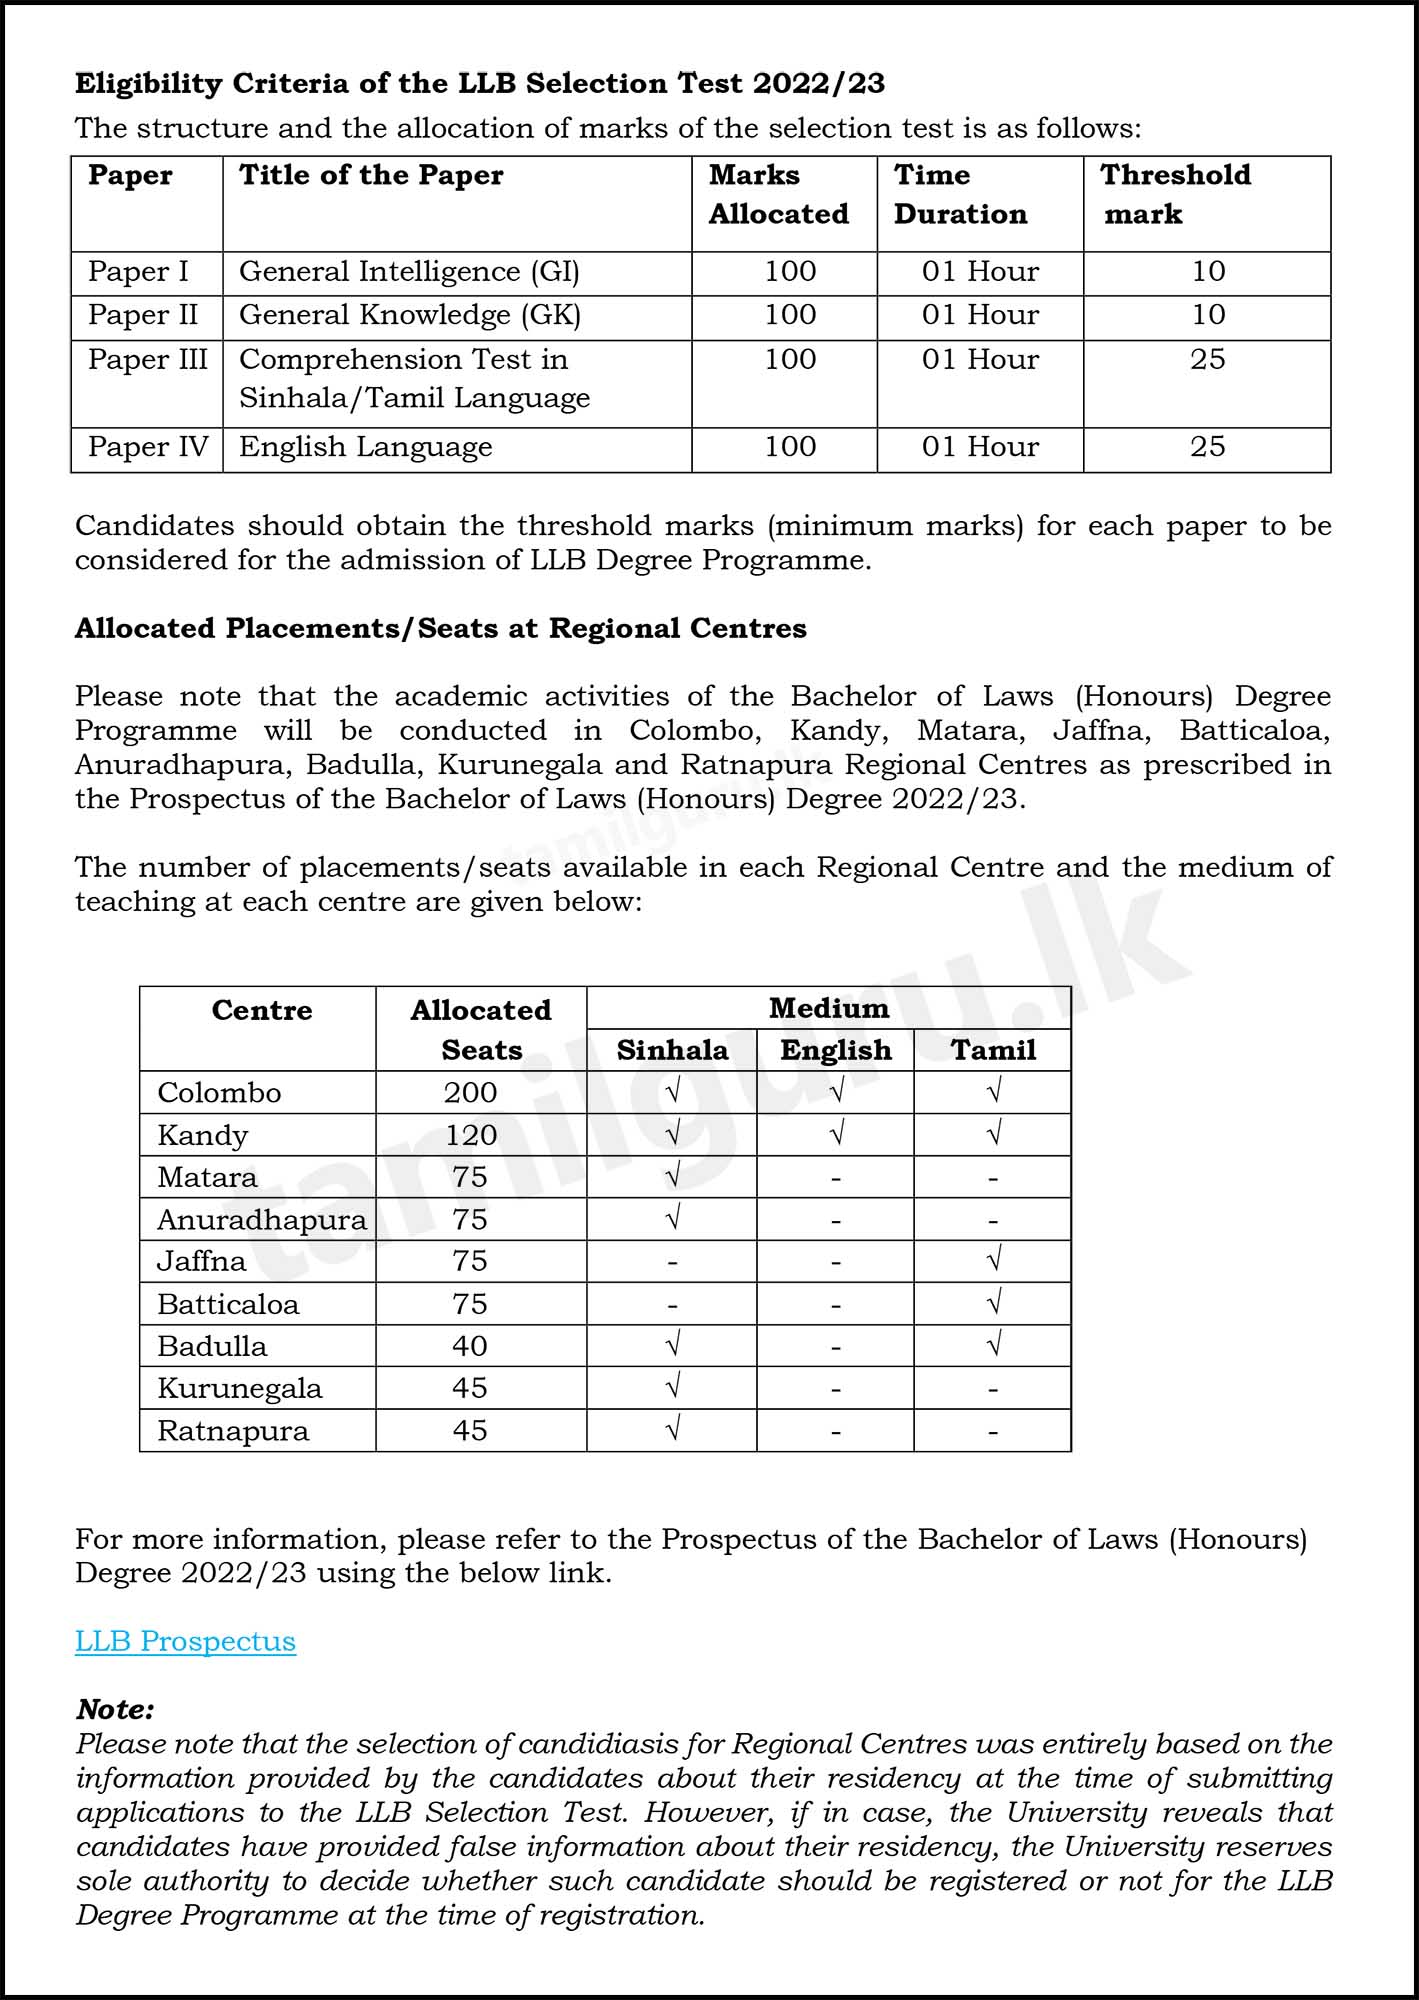 Eligibility Criteria of the Open University LLB Selection Test 2022-23